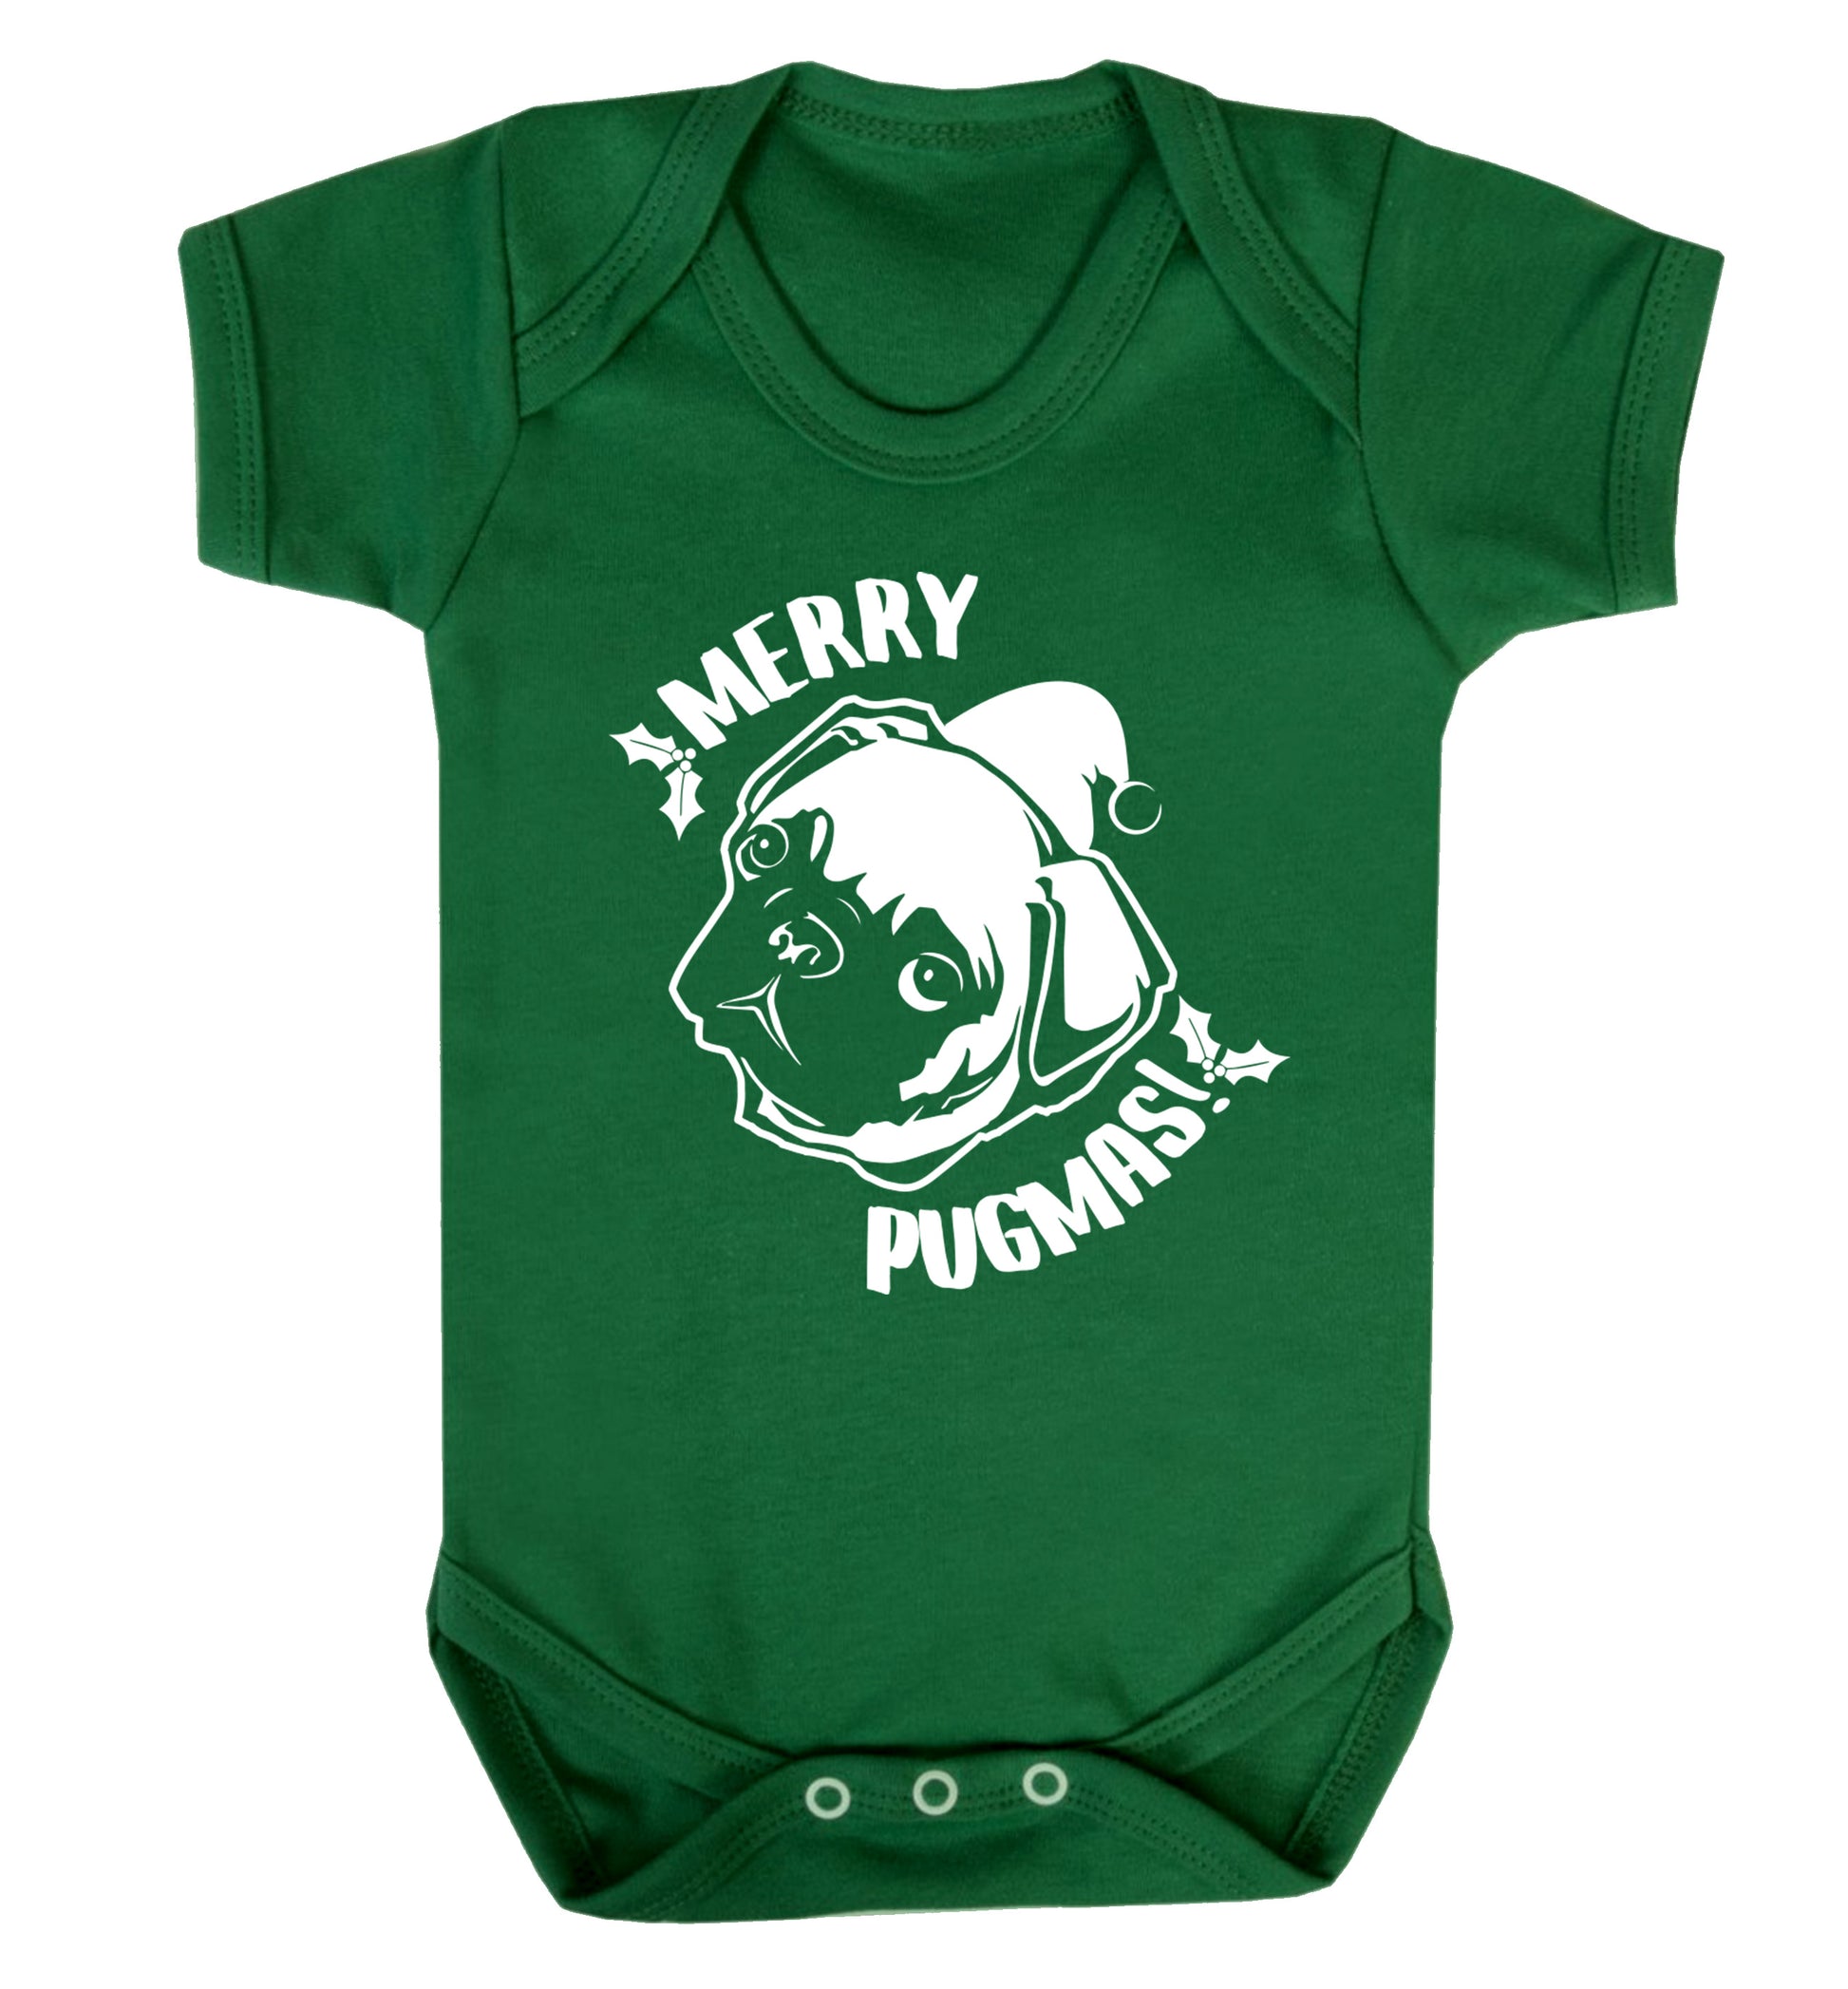 Merry Pugmas Baby Vest green 18-24 months